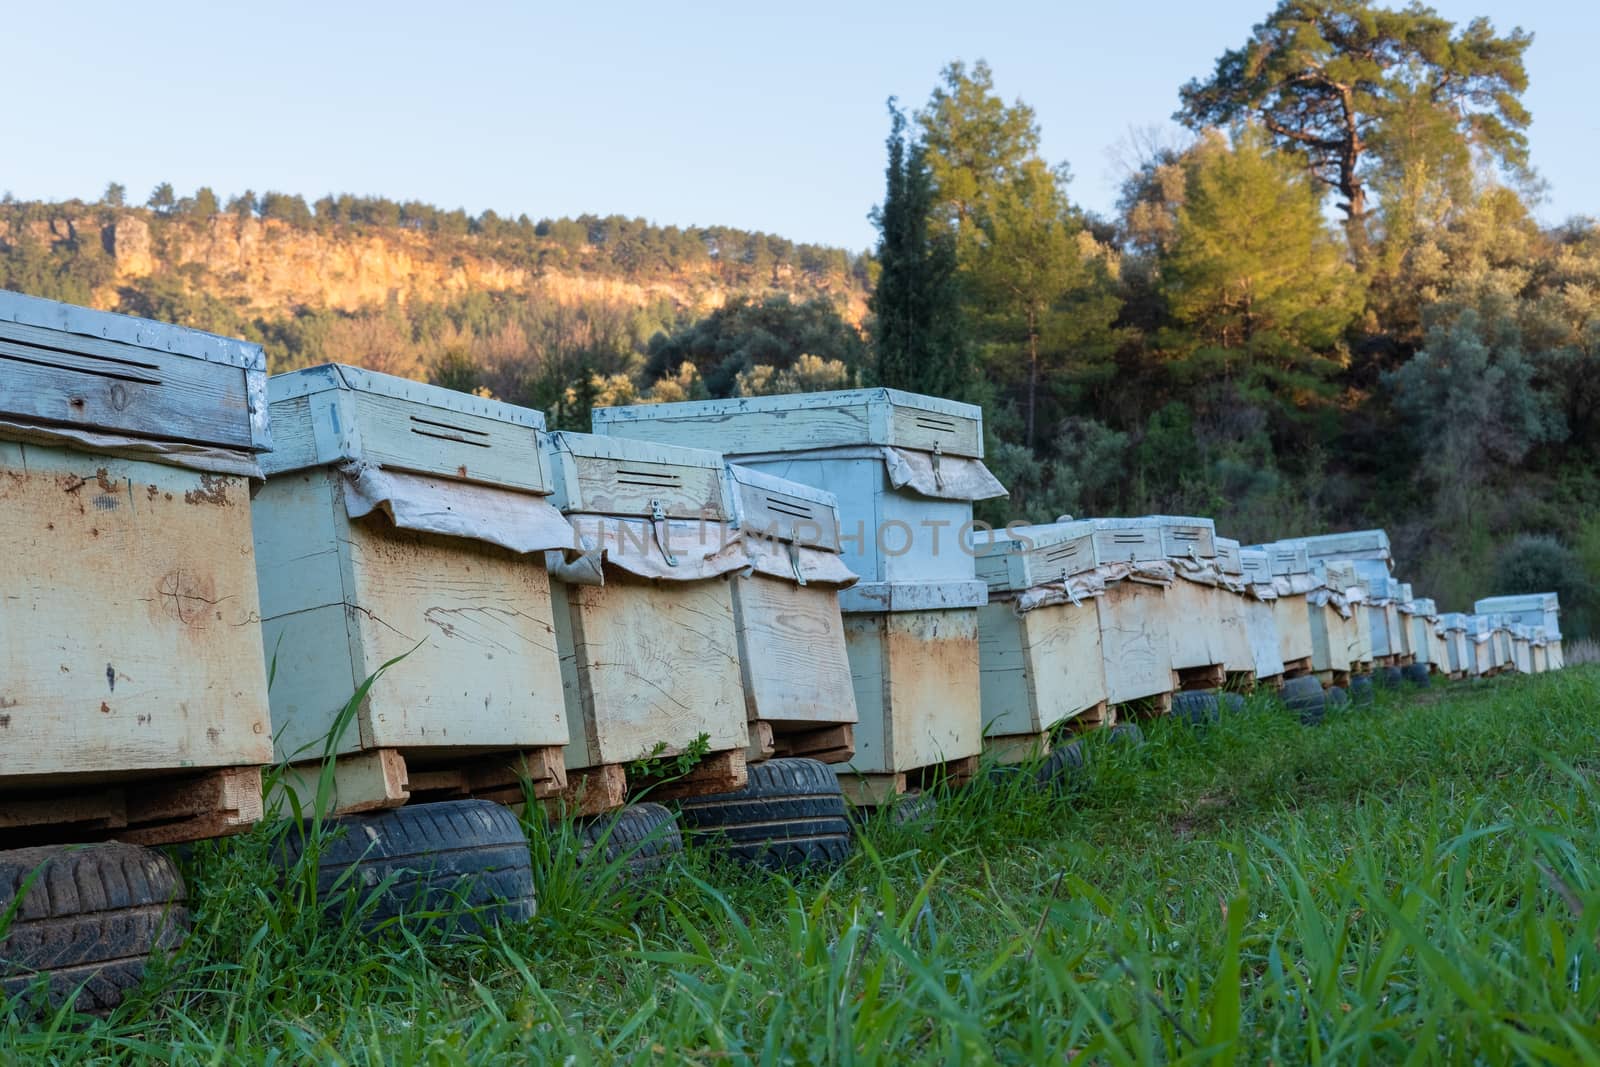 Many closed beehives in a row waiting for the seasonin the nature.